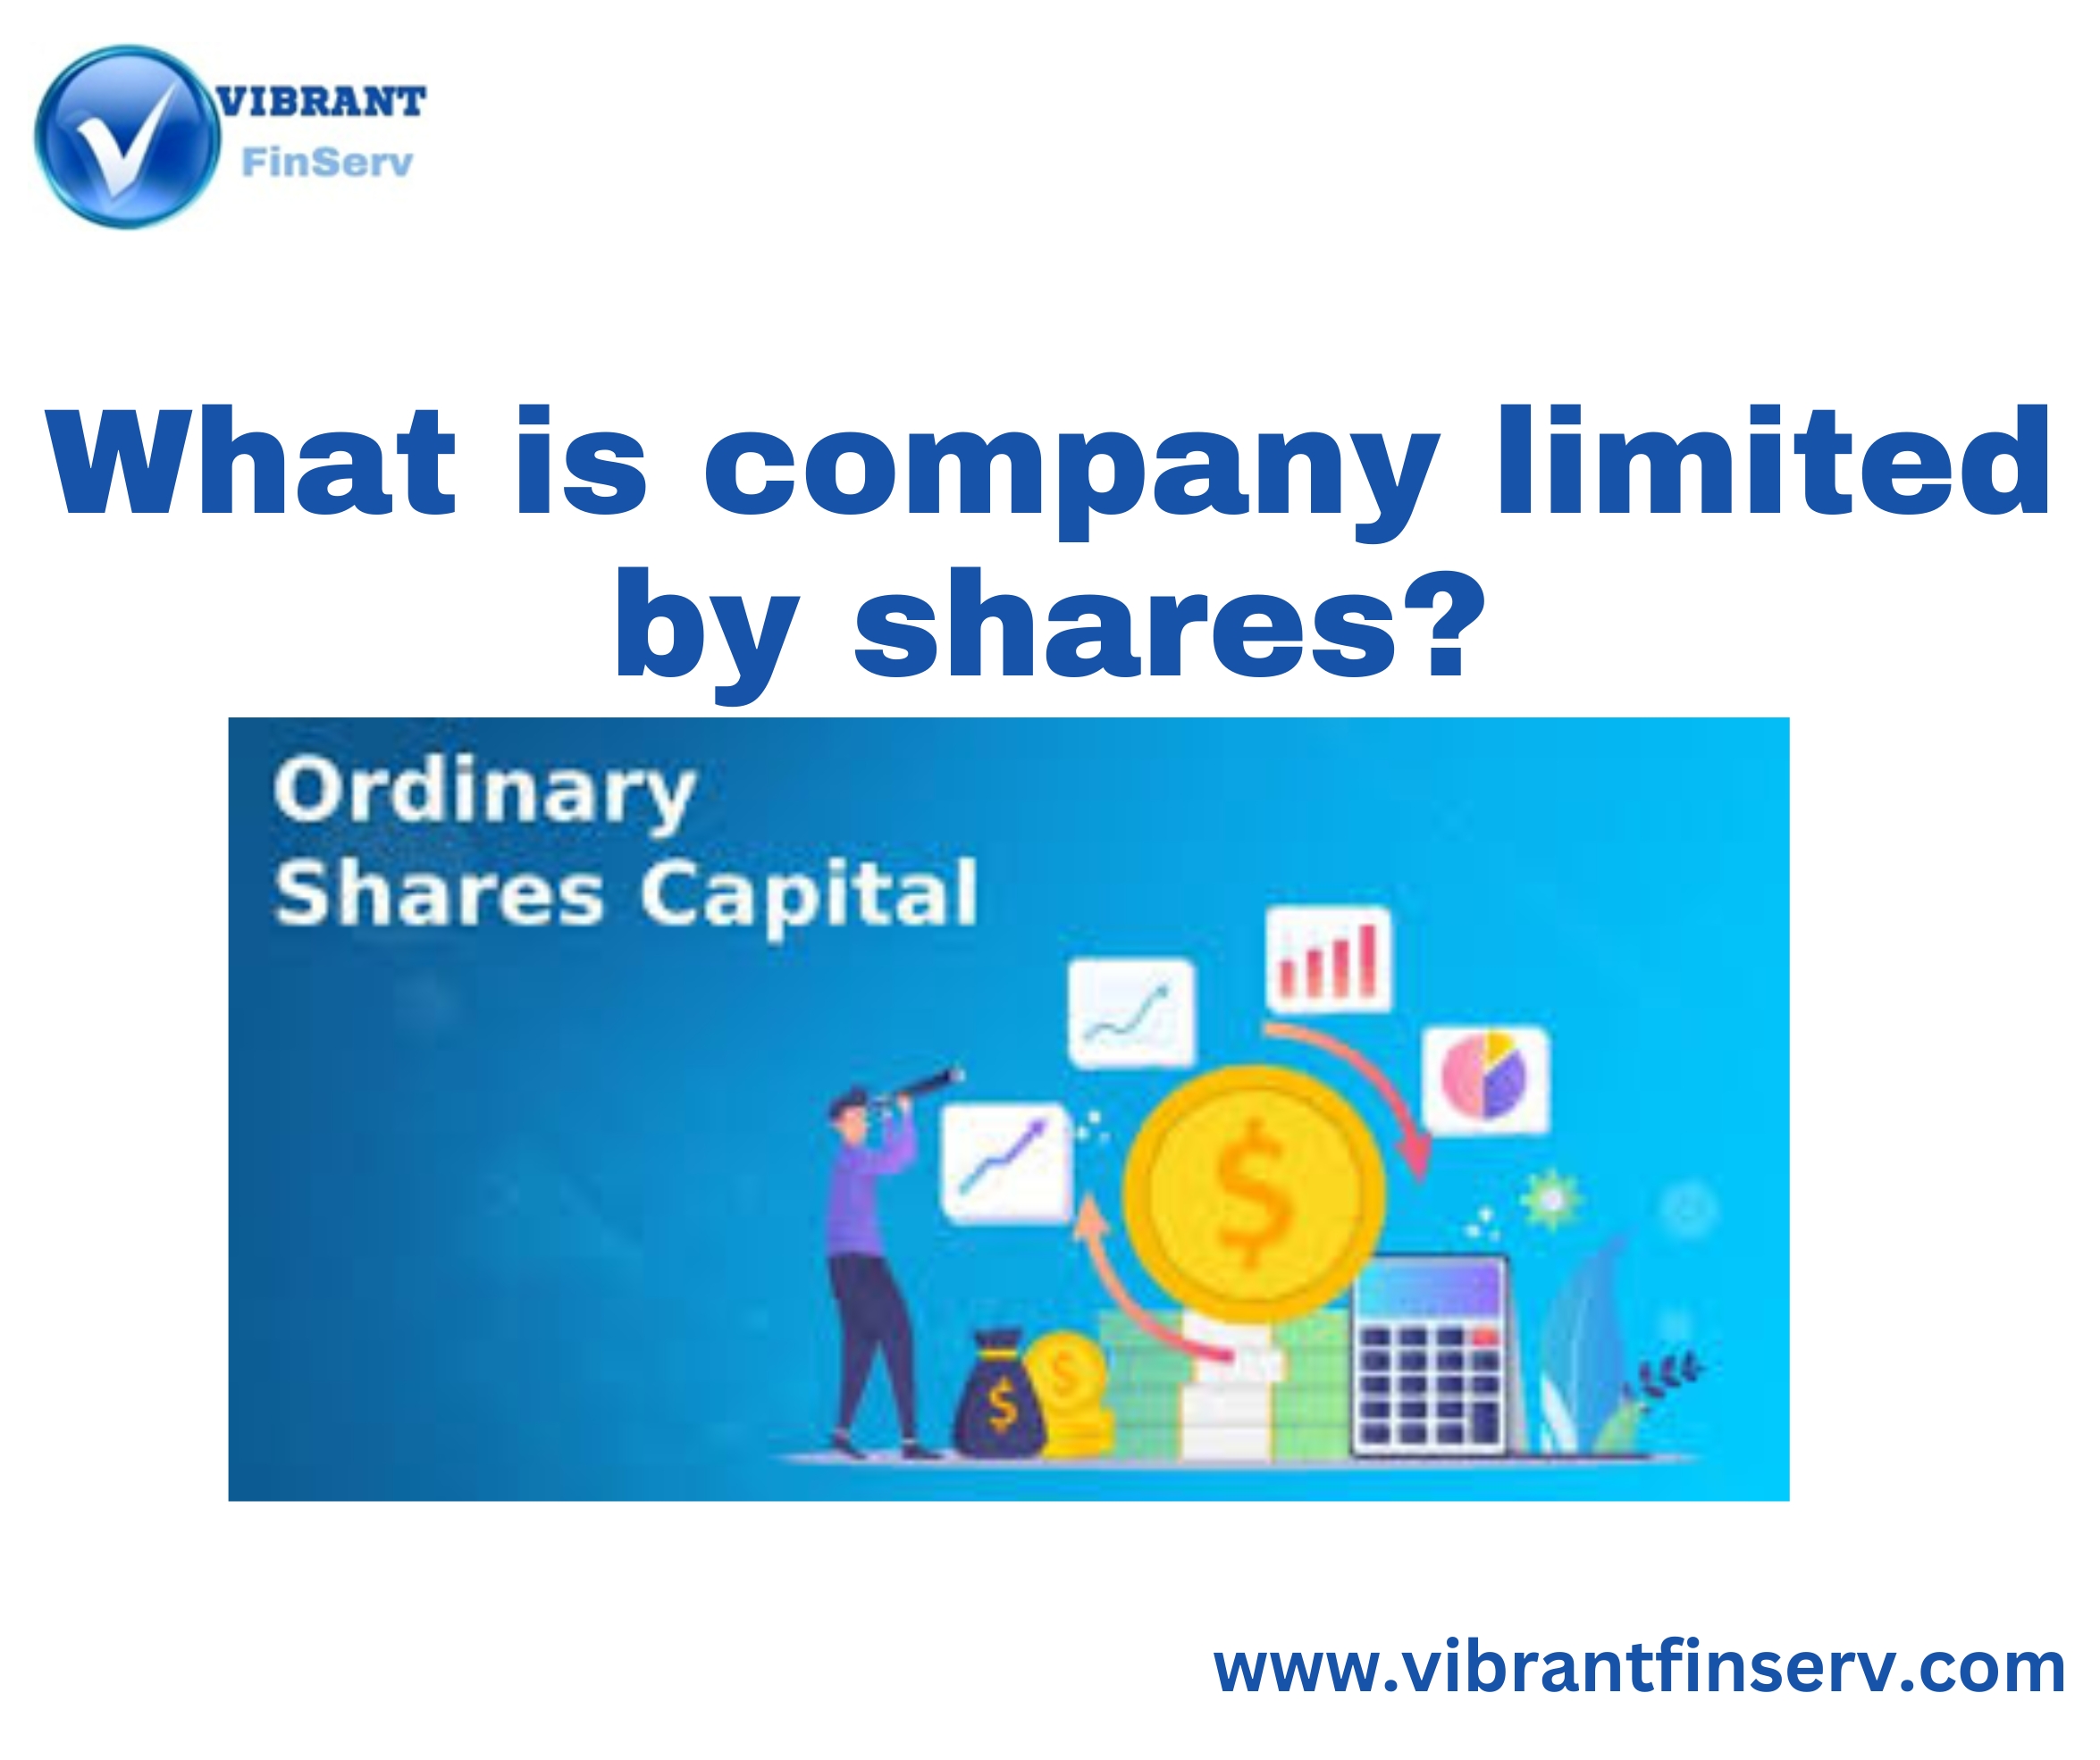 What is company limited by shares